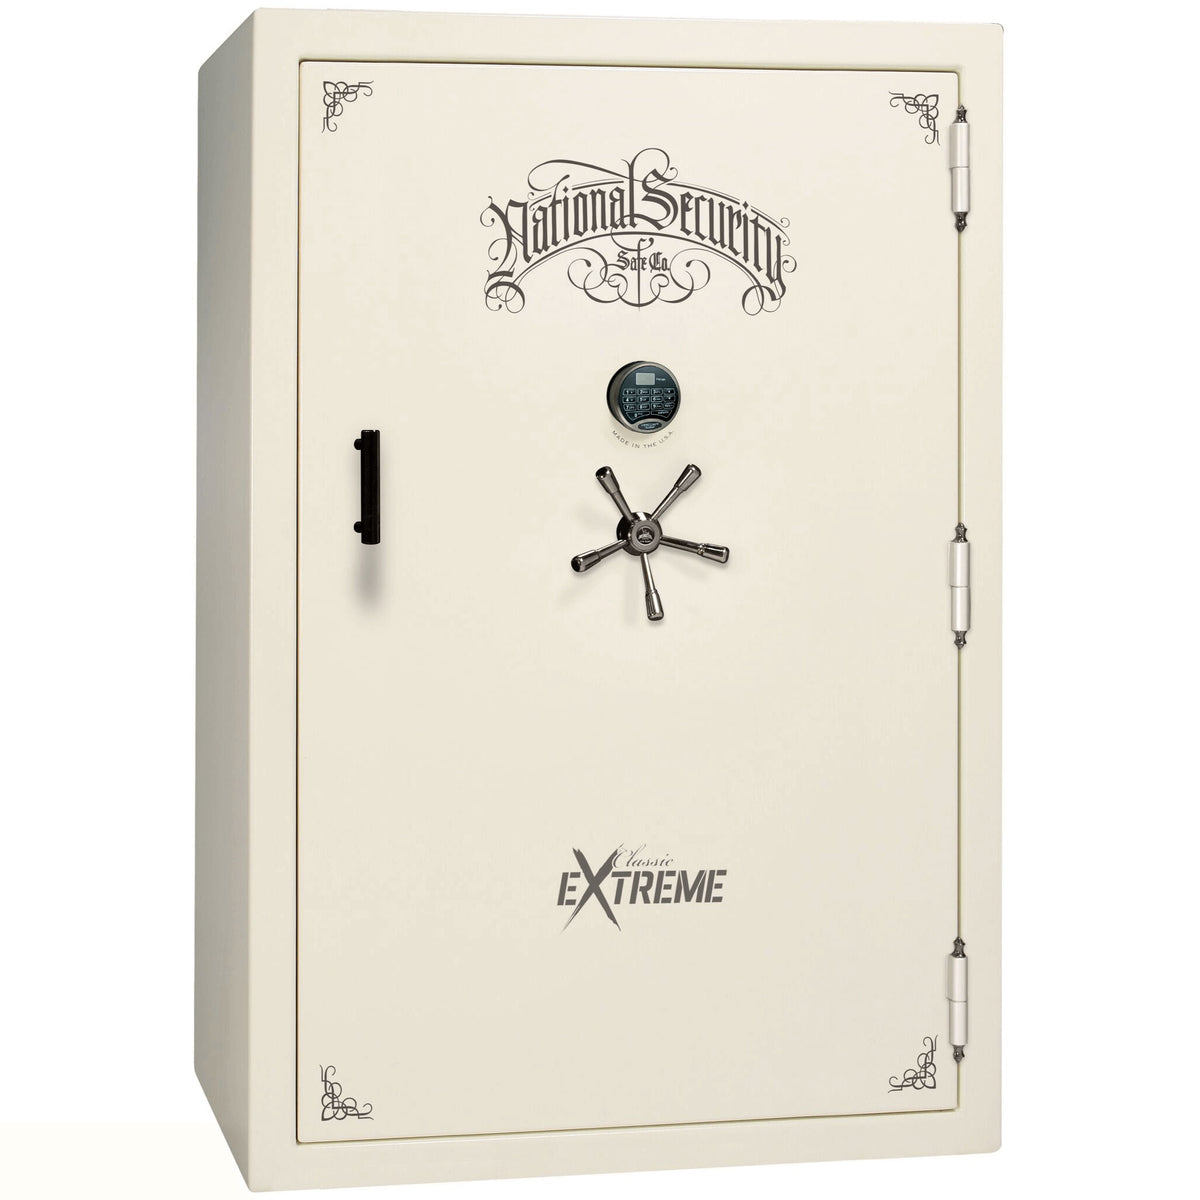 Liberty Classic Select Extreme Wide Body Safe in White Marble with Black Chrome Electronic Lock.